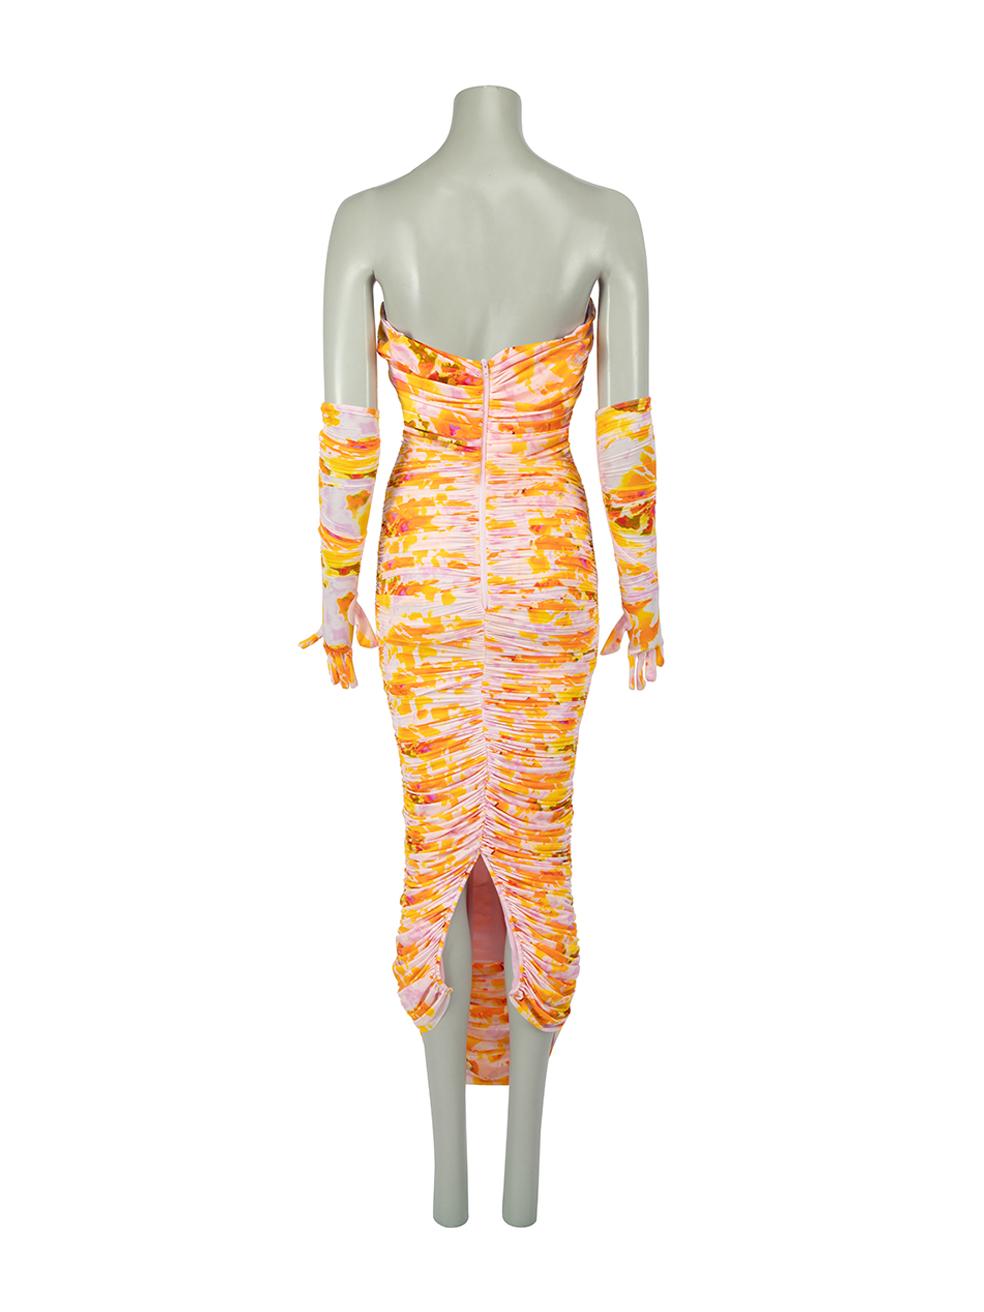 Alex Perry Tie Dye Ruched Parton Dress with Gloves Size XXS In New Condition For Sale In London, GB